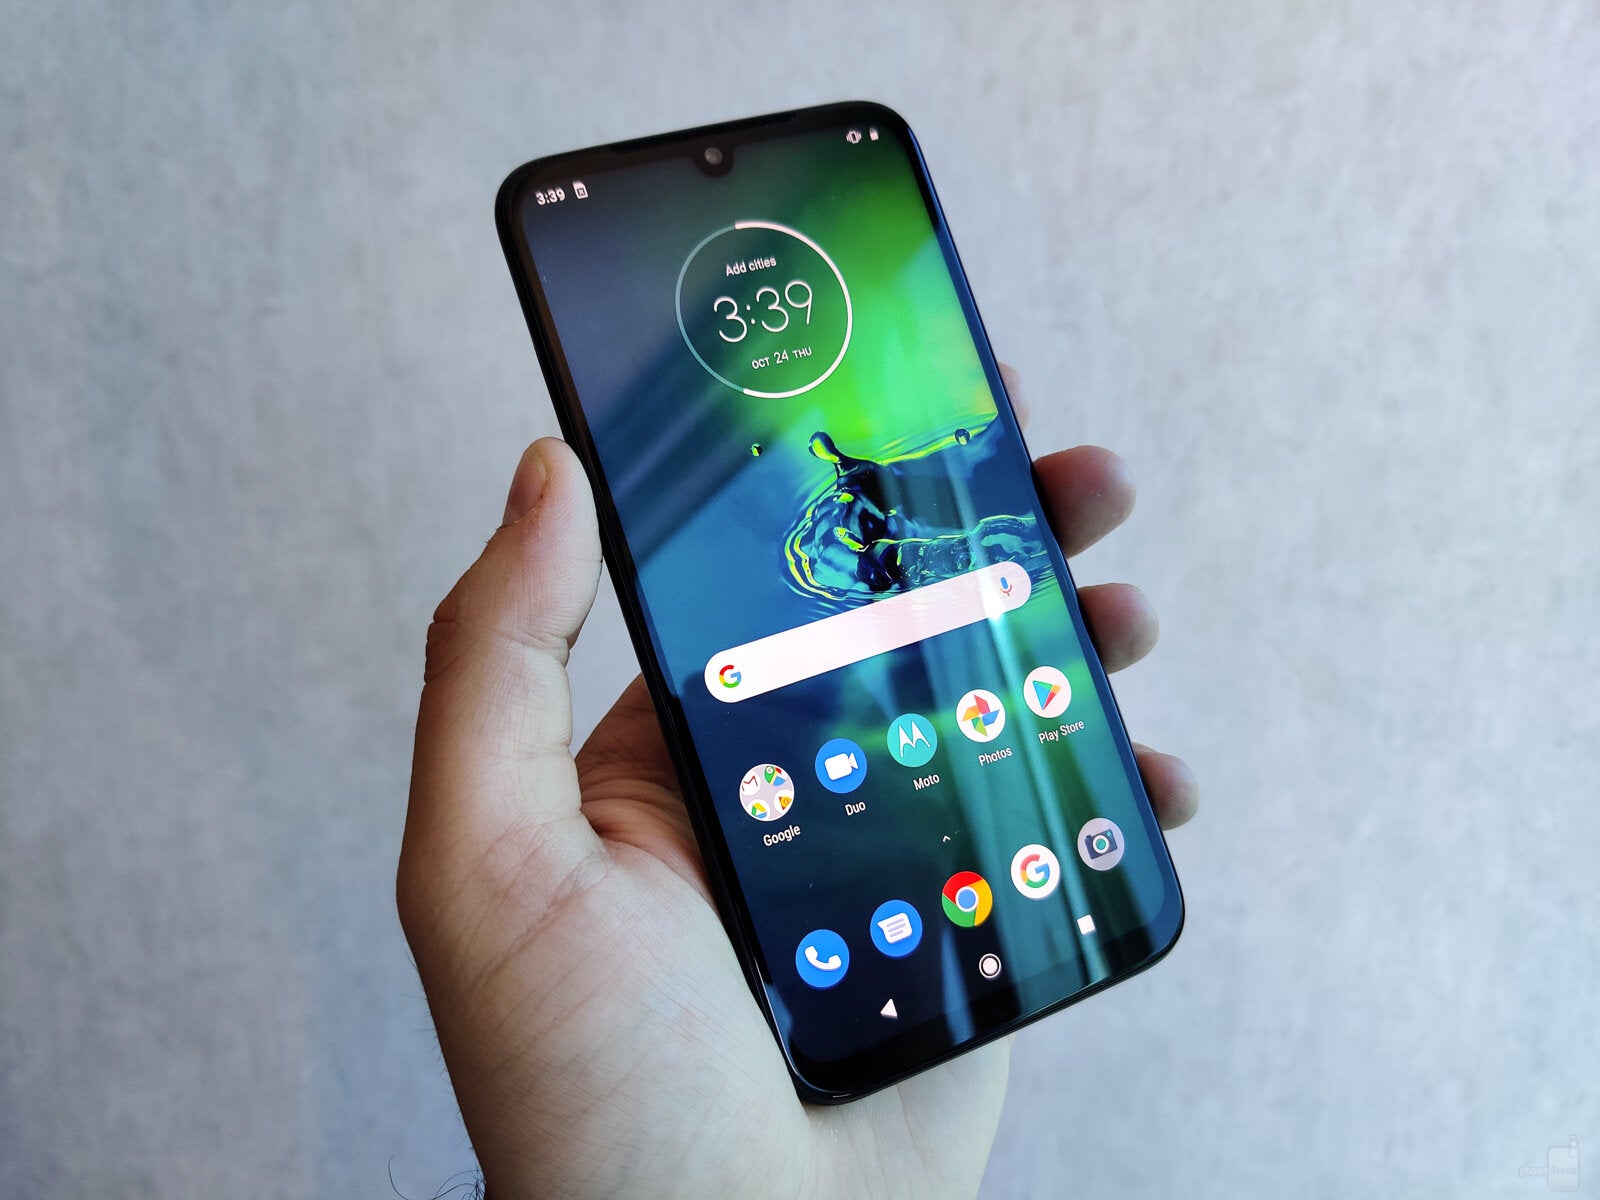 Moto G8 Plus hands-on: Mid-range excellence with identity crisis